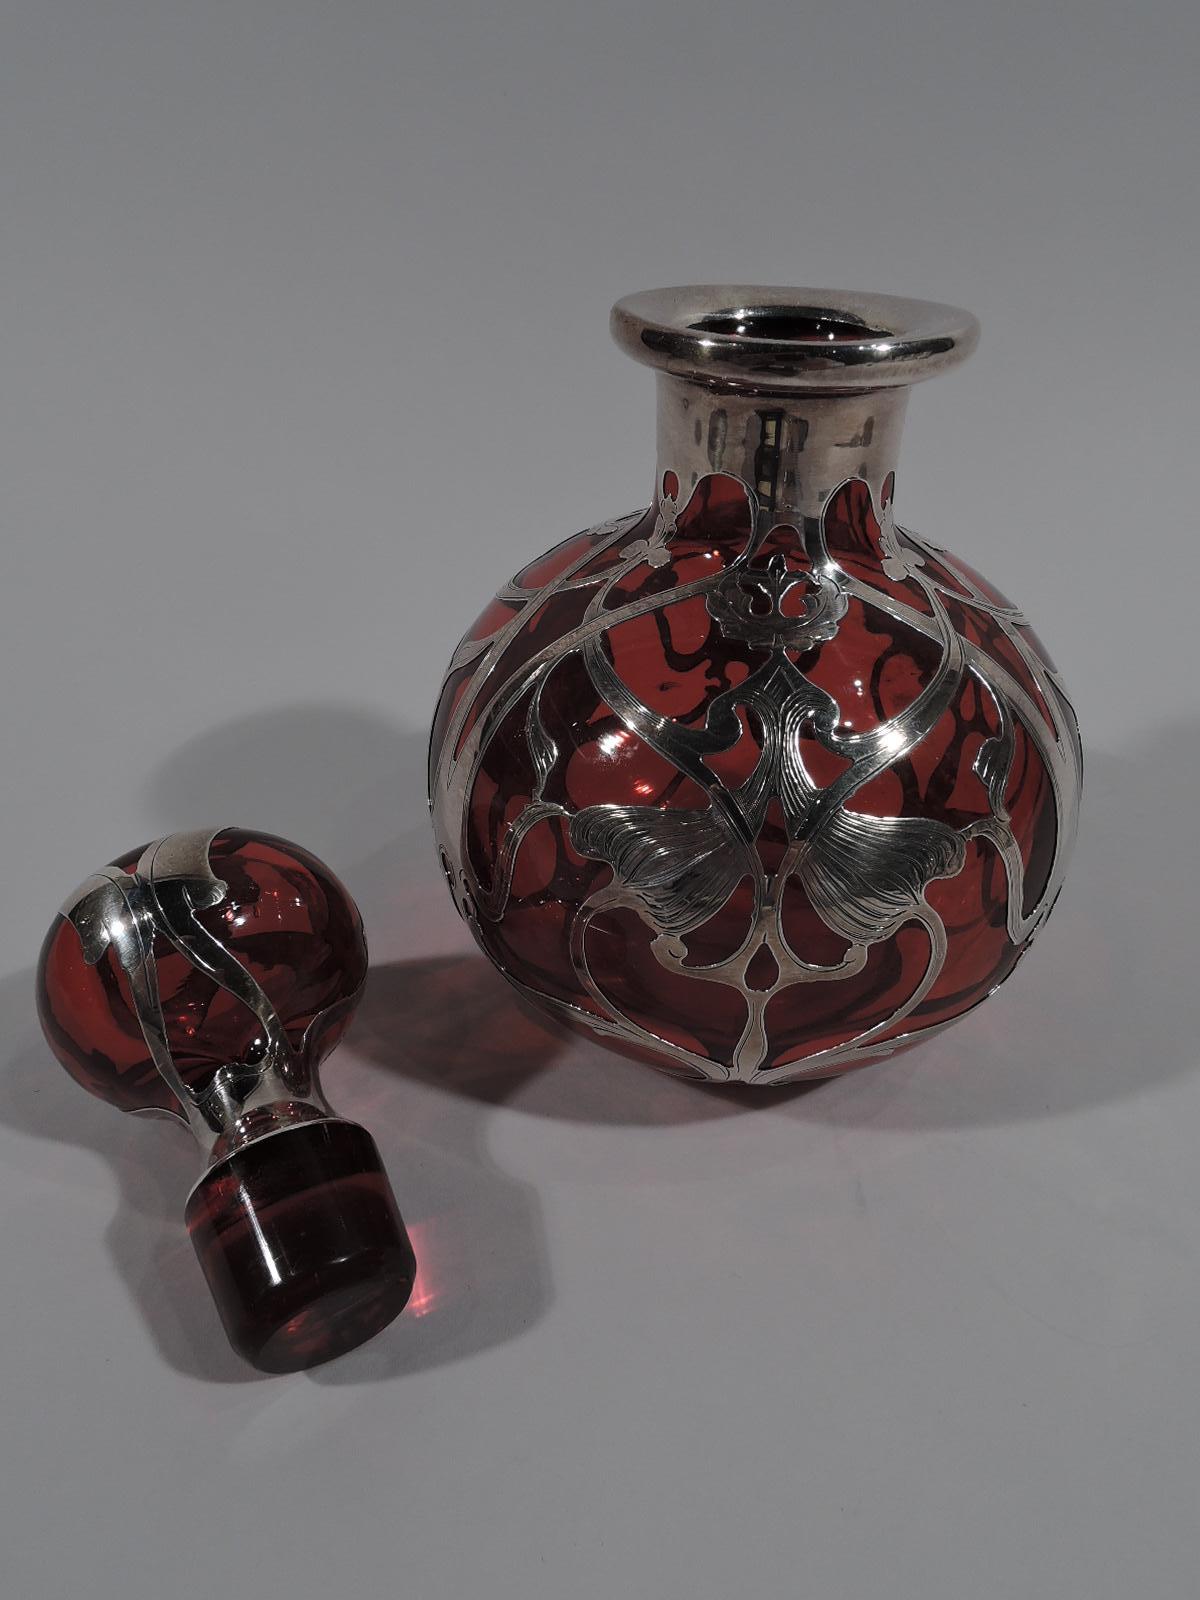 American Large Gorham Art Nouveau Red Silver Overlay Cologne Bottle